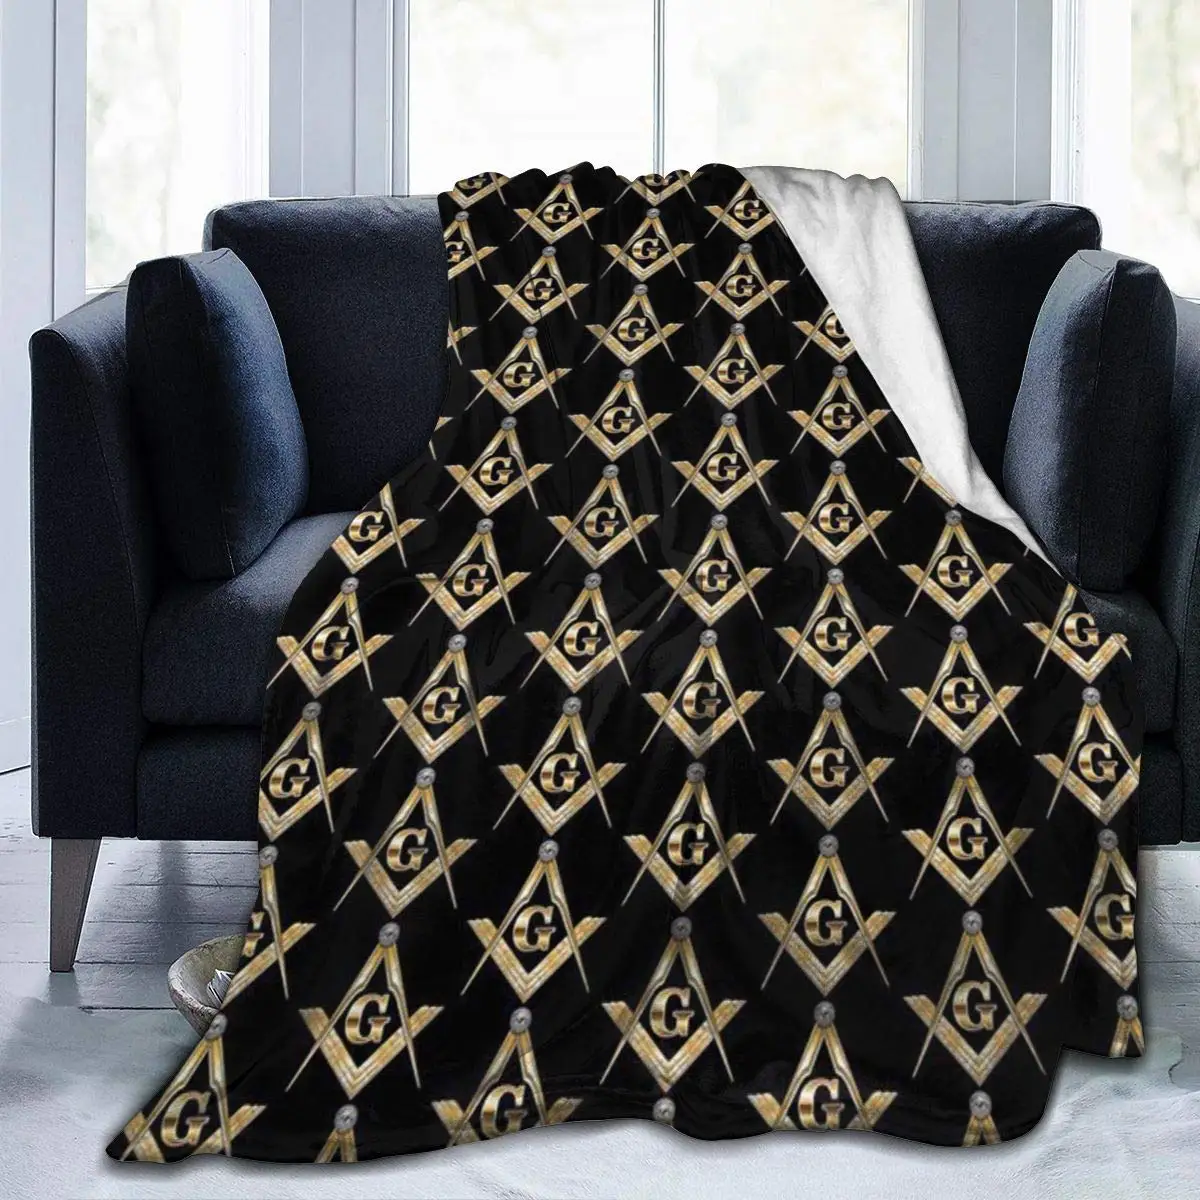 

Charity Freemason Logo Black Blanket and Masonic Faith Hope Extra Soft Flannel Throw Blankets Cloak Oversized for Sofa Bed Gifts